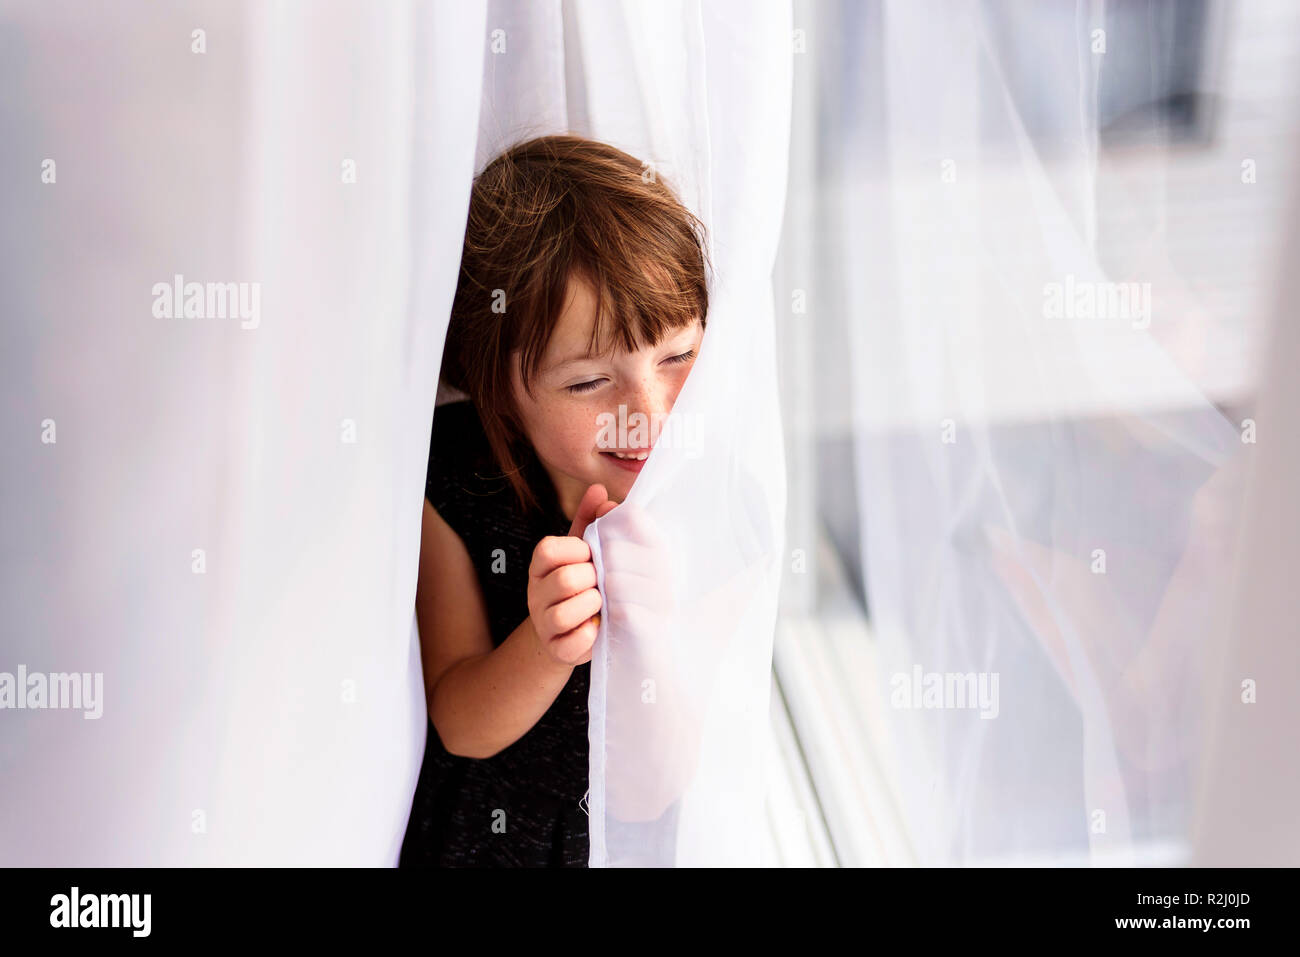 Smiling girl hiding behind a curtain Stock Photo